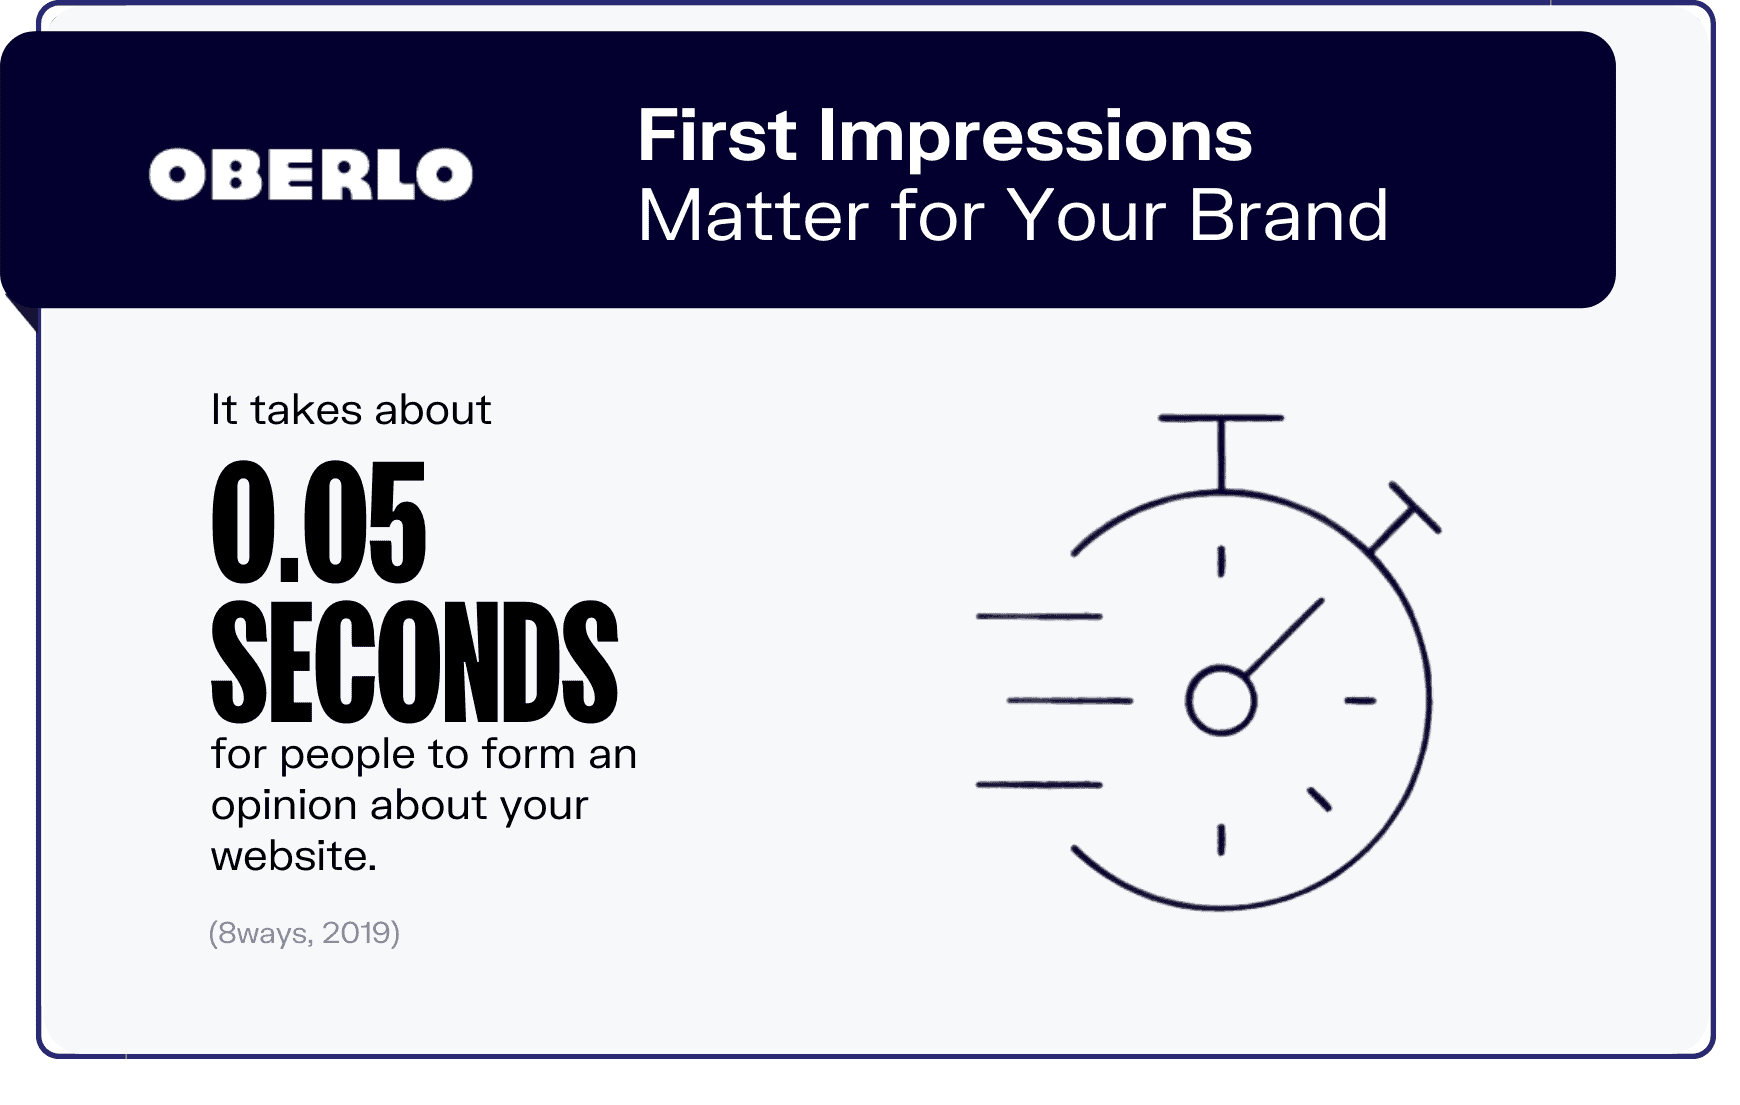 First impressions matter for your brand